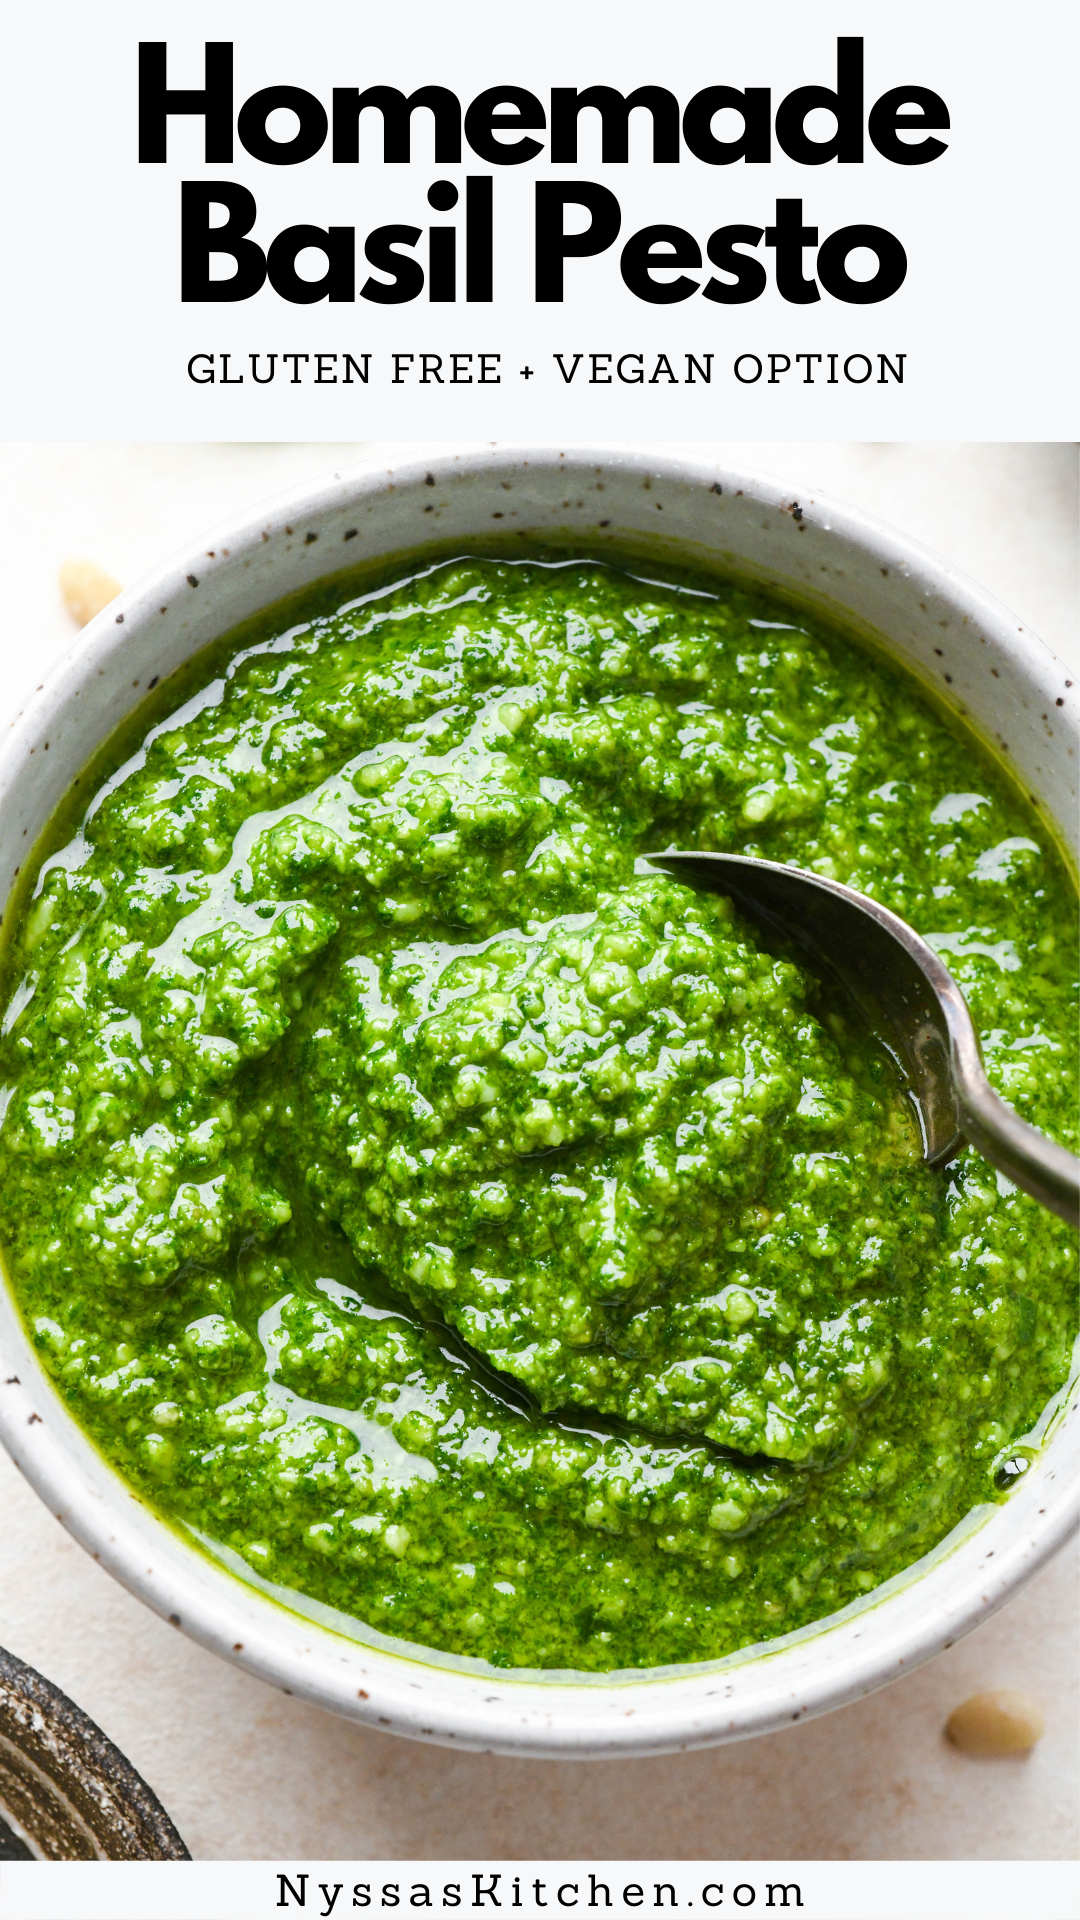 Homemade basil pesto is a versatile and easy to make sauce that tastes so much better than store bought! It's creamy, bursting with fresh flavors, and ready in less than 5 minutes. Perfect for everything from pesto pasta, to sandwiches, on pizza, with roasted veggies, in salads, to your favorite grilled protein. Gluten free, vegan / dairy free / paleo / Whole30 option.